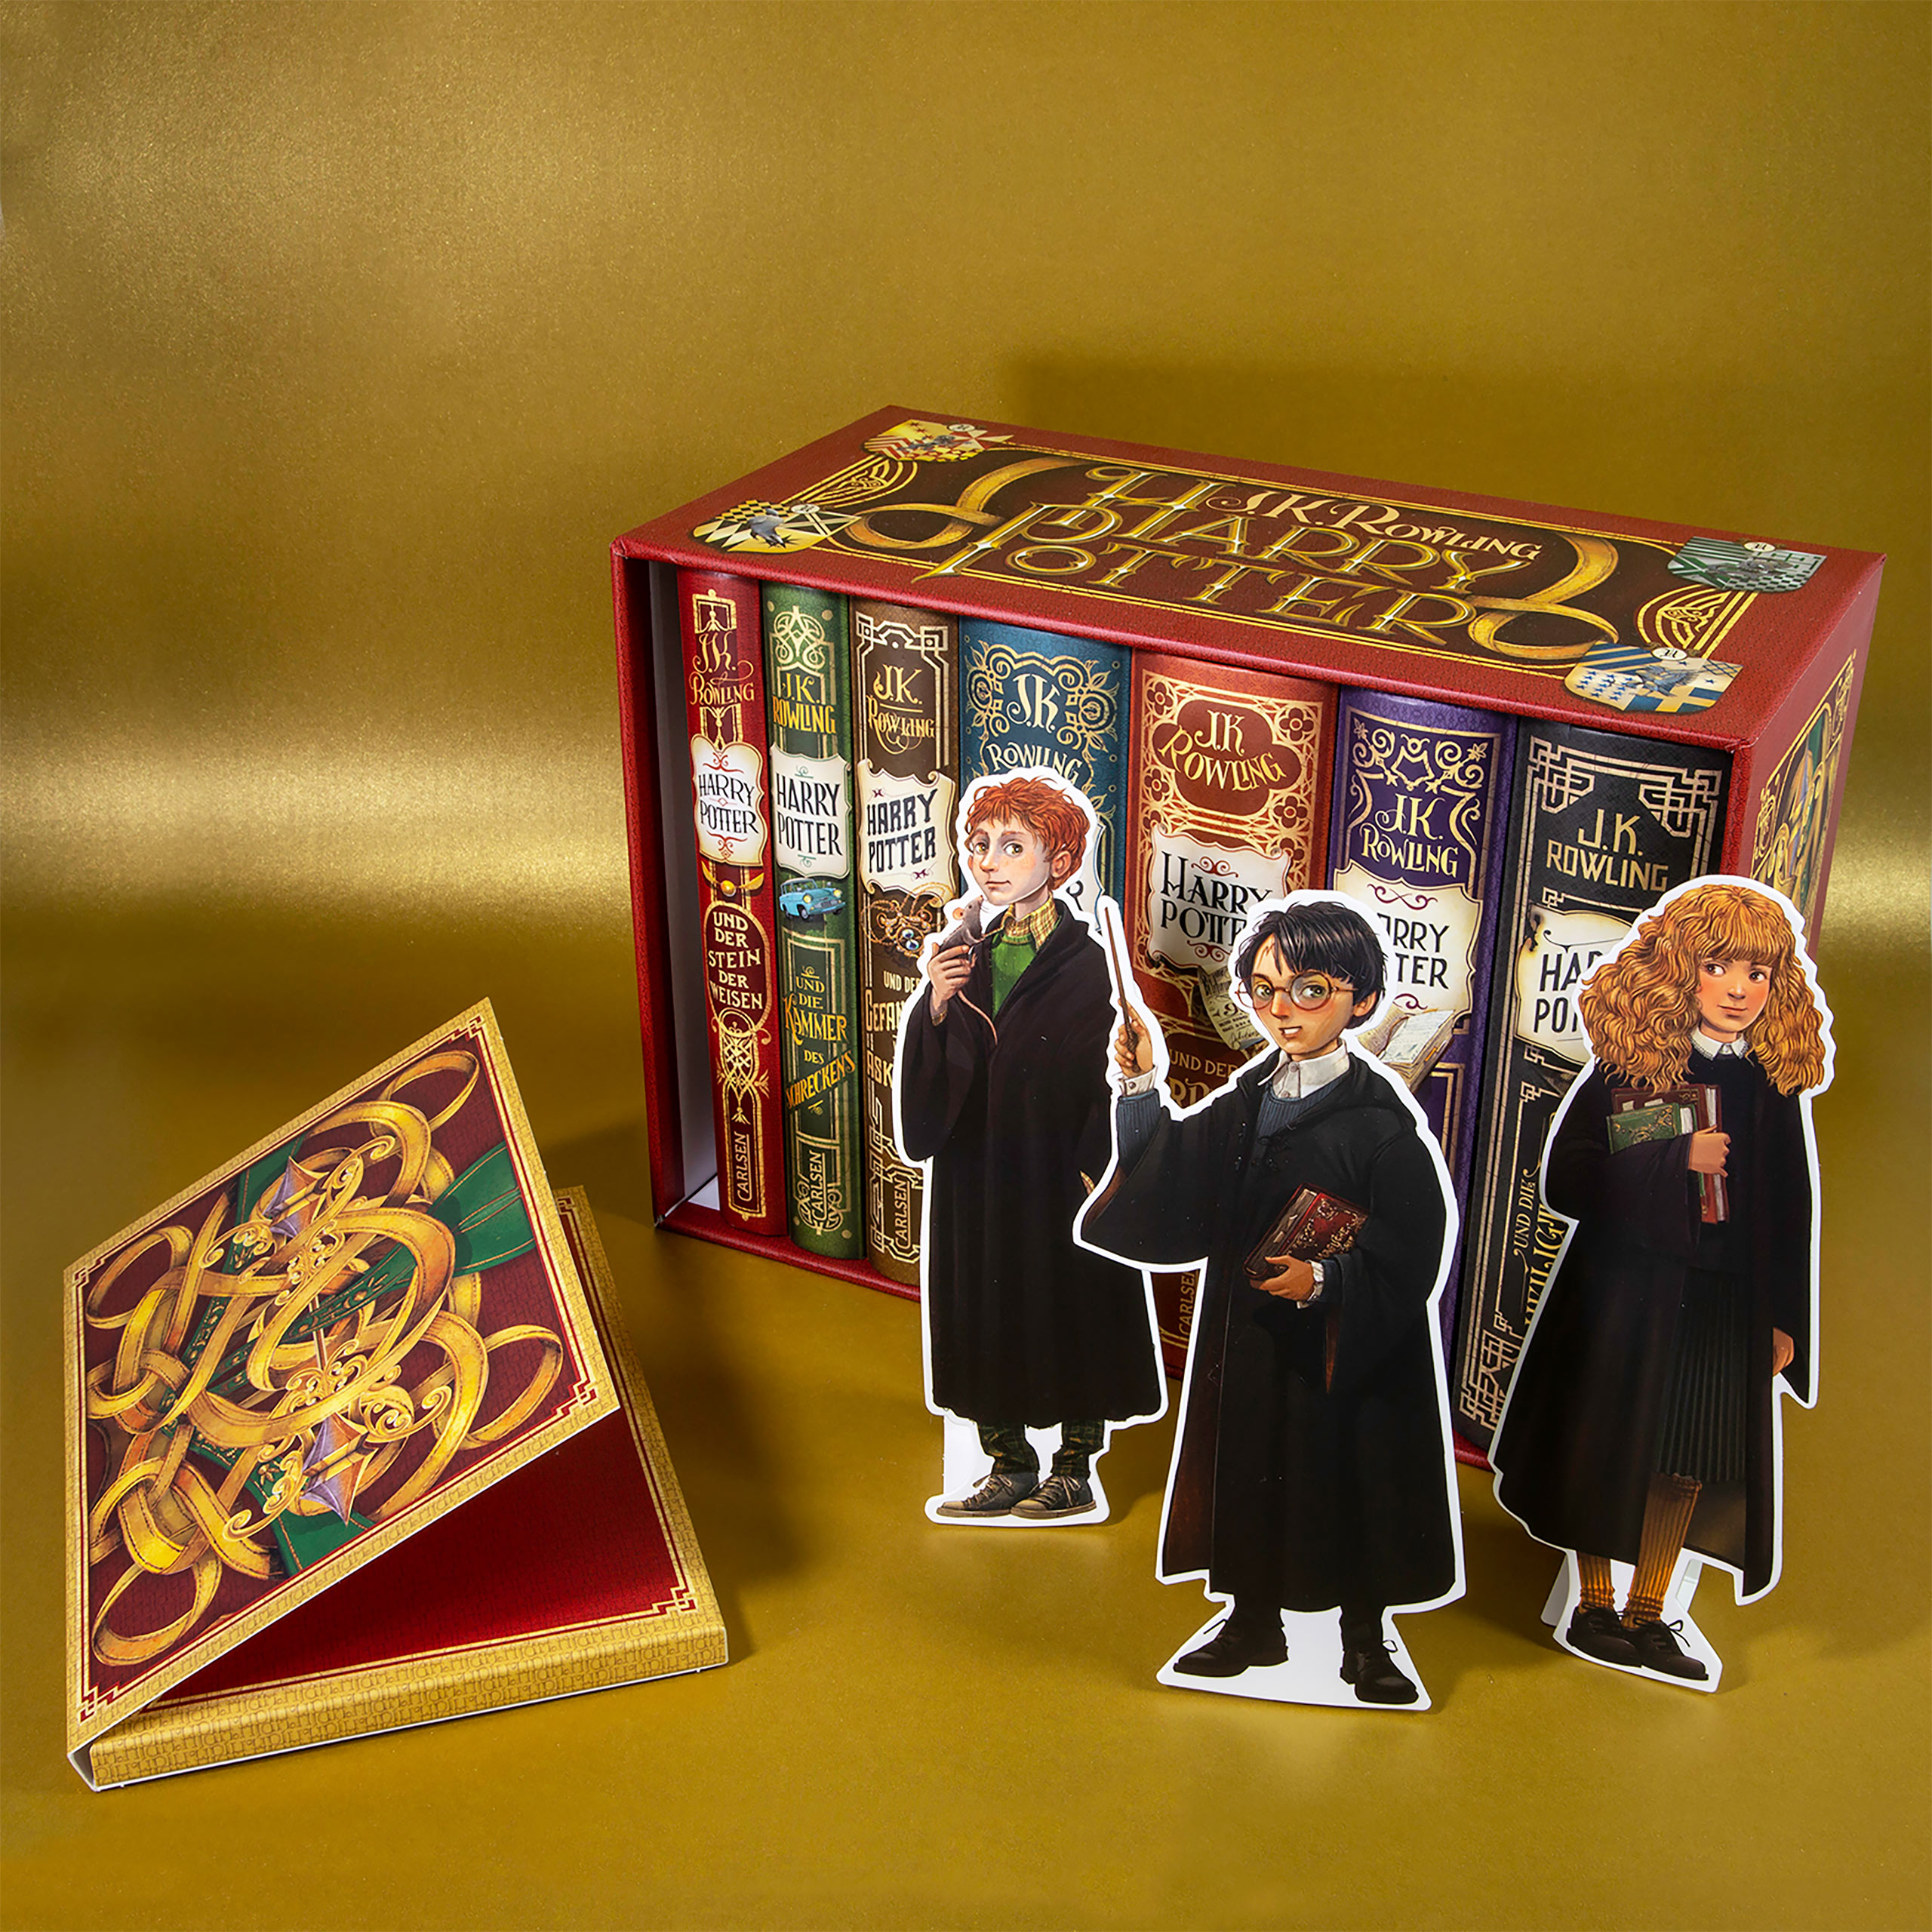 Harry Potter - Volumes 1-7 in Box Set with Exclusive Extra